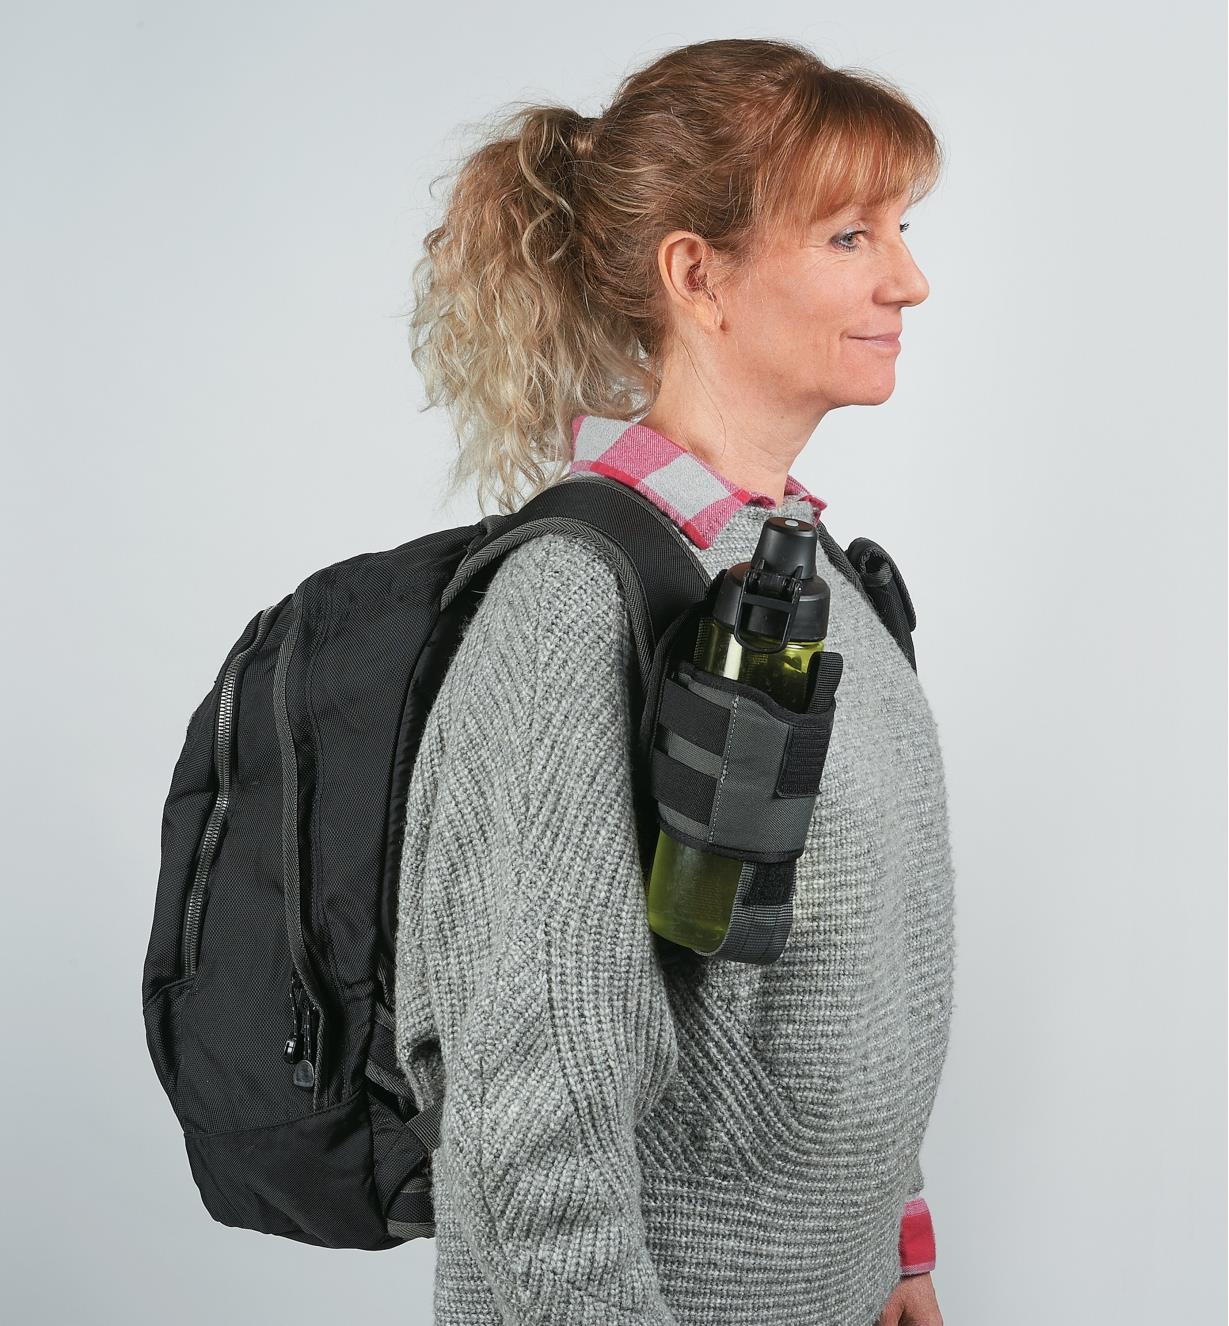 A woman wearing a backpack with a Drink Holster attached